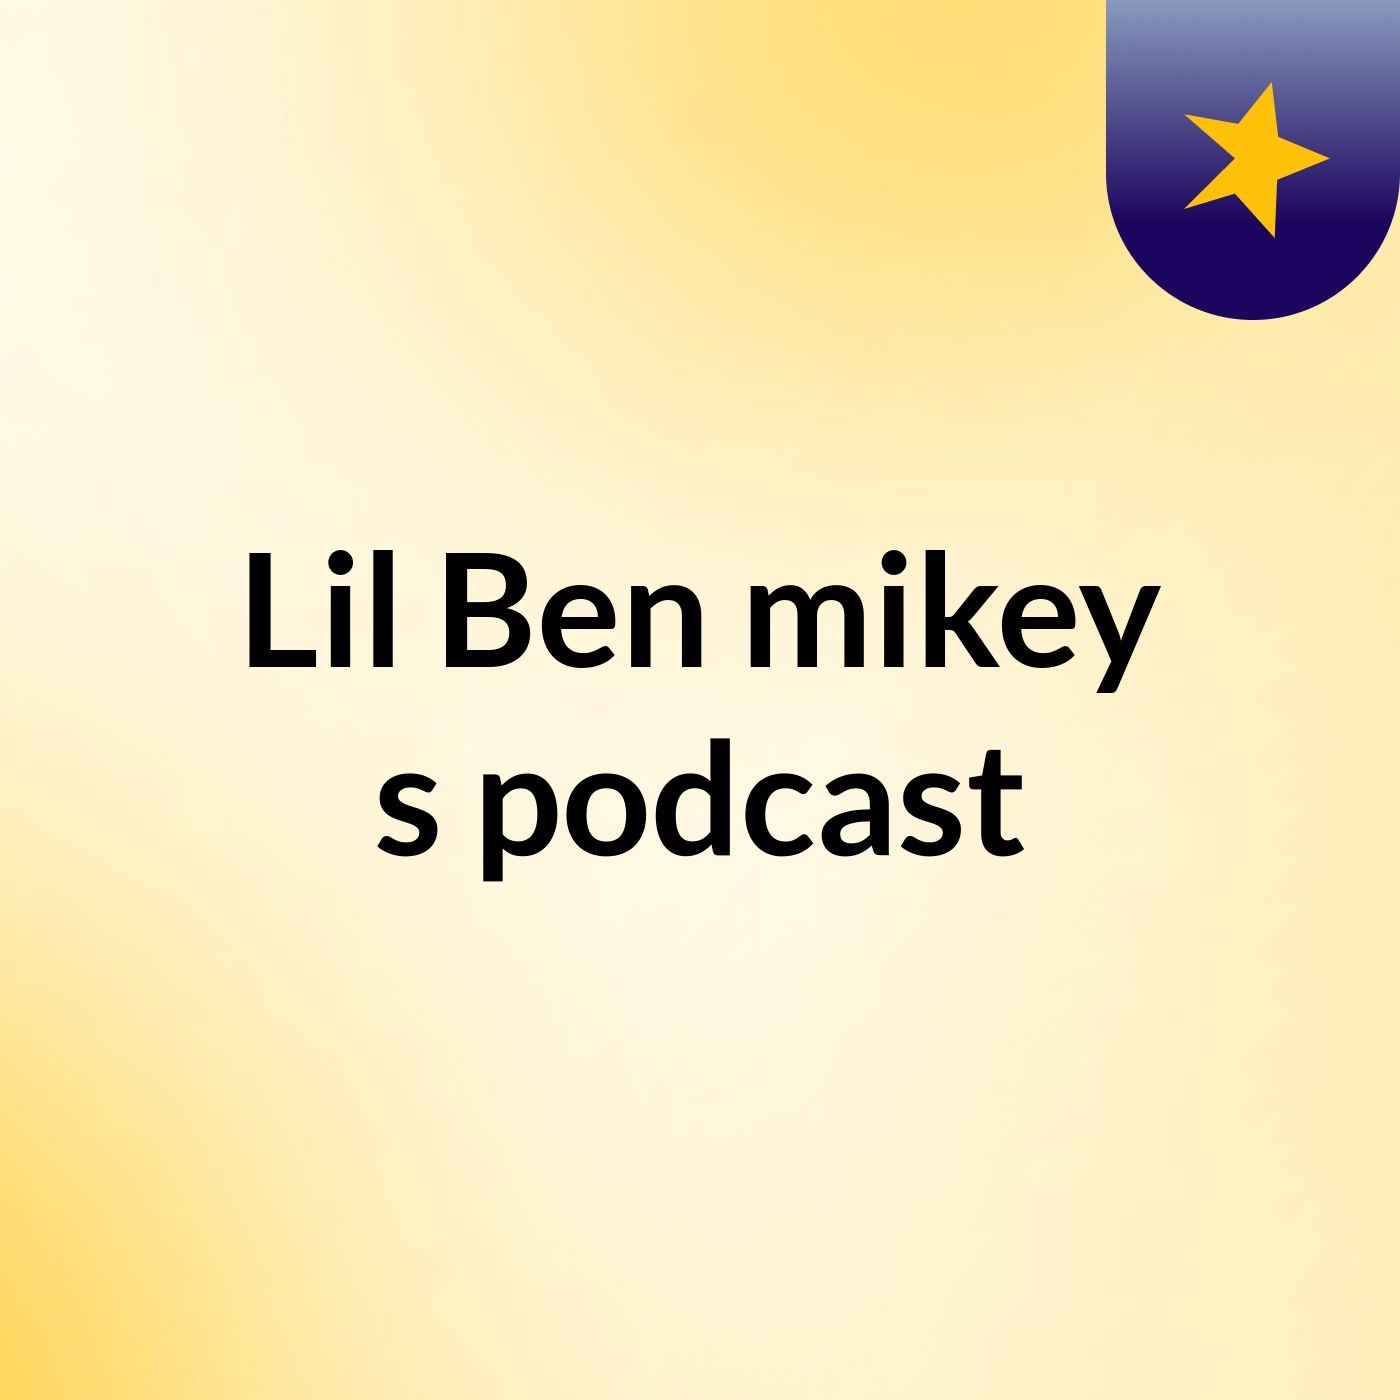 Episode 2 - Lil Ben mikey's podcast